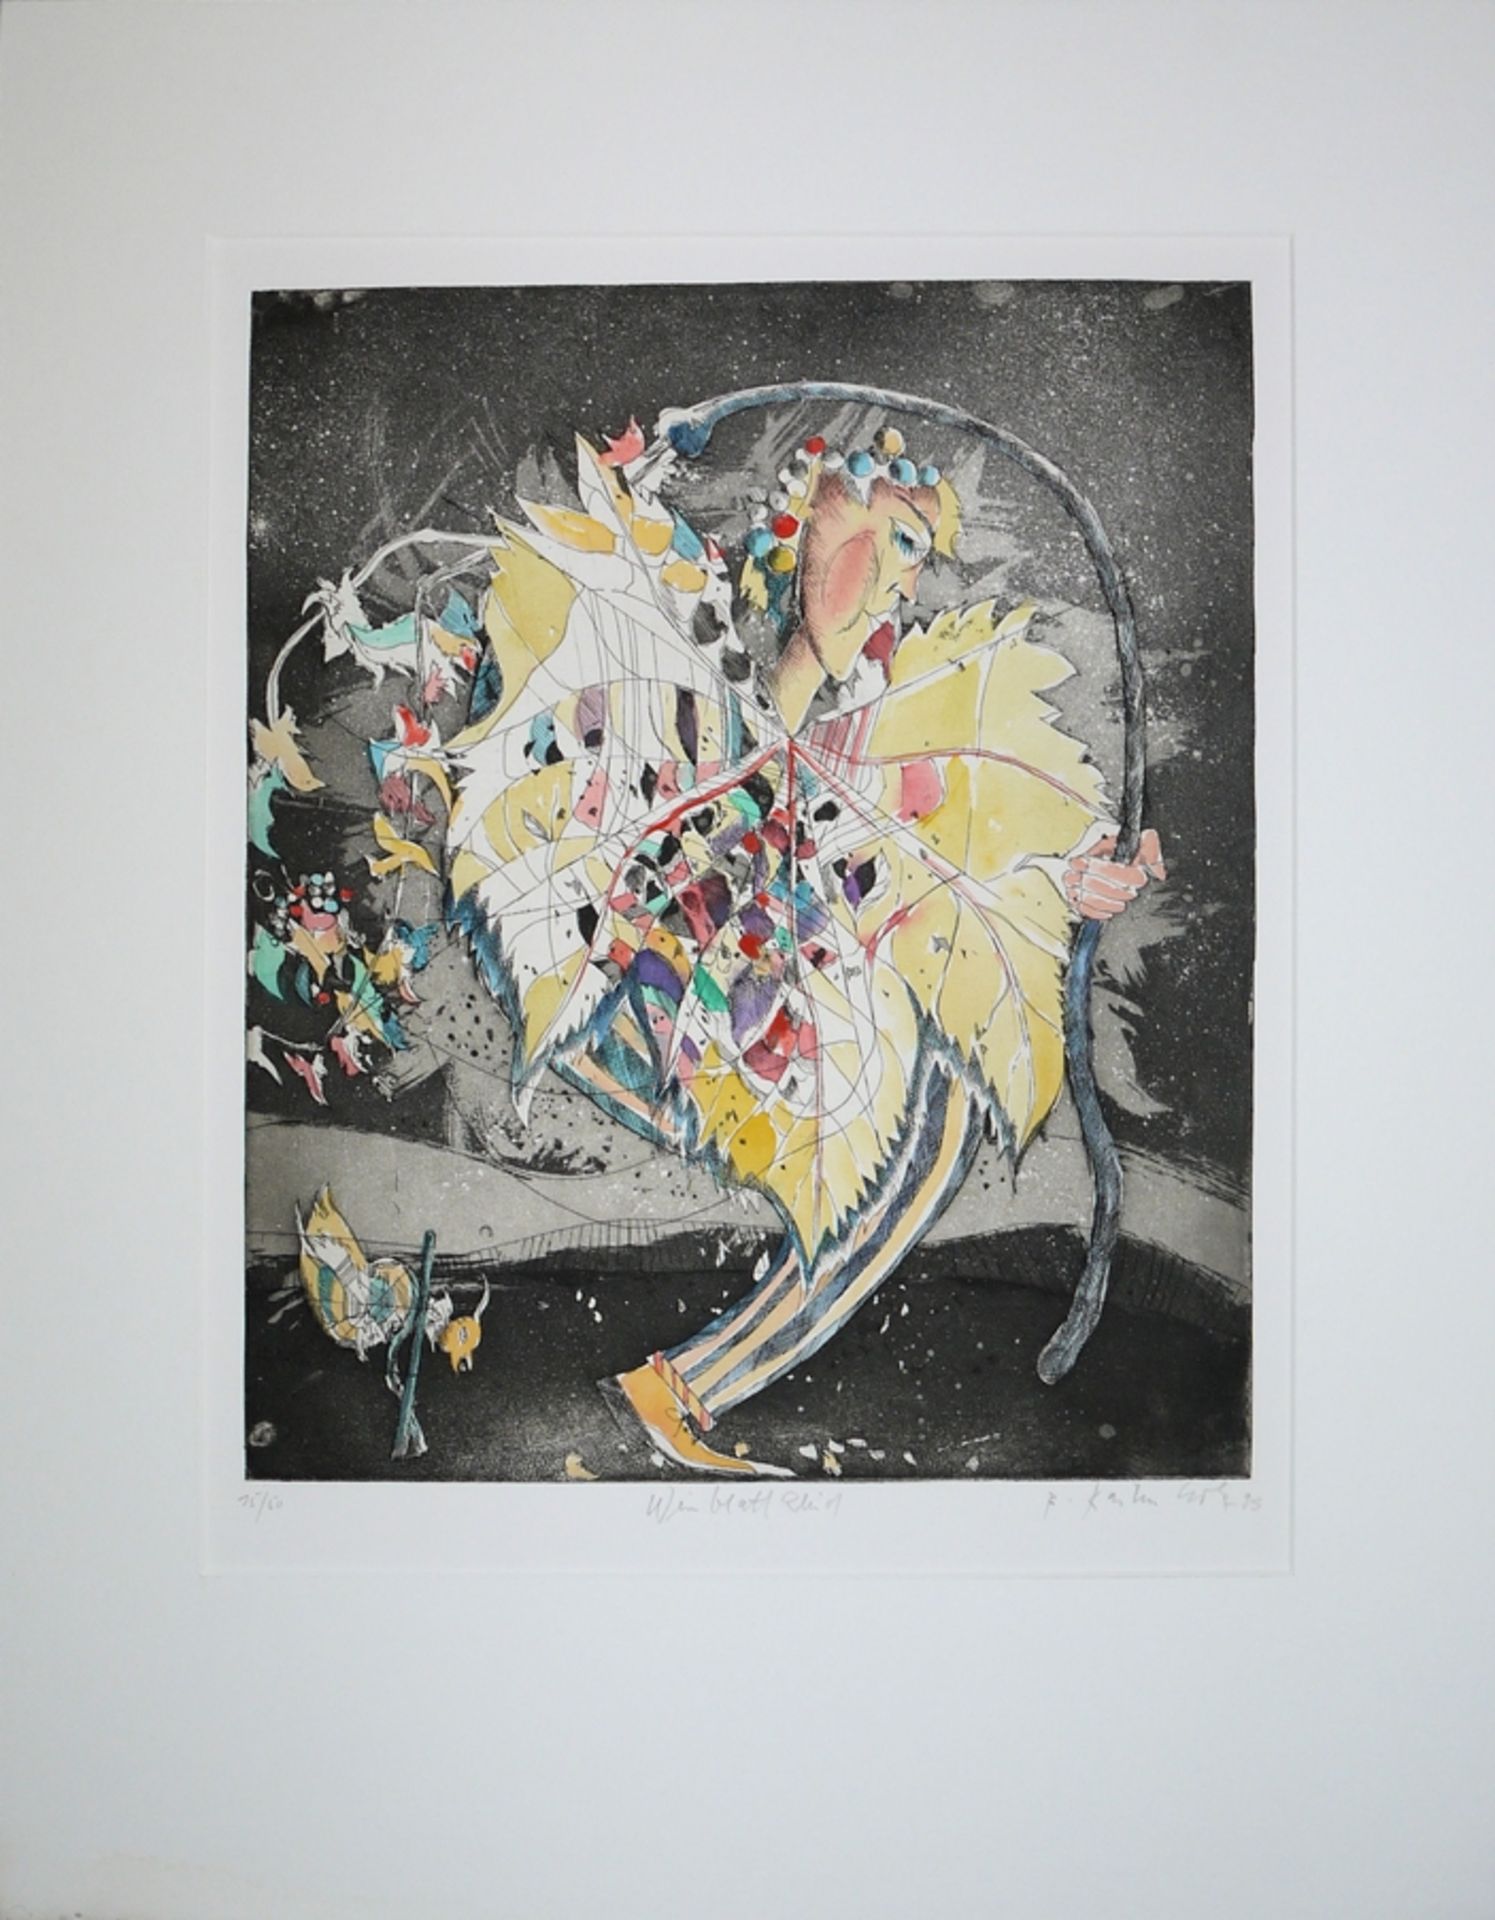 Bernd Kastenholz, Collection estate with 15 signed colour etchings and 3 signed posters